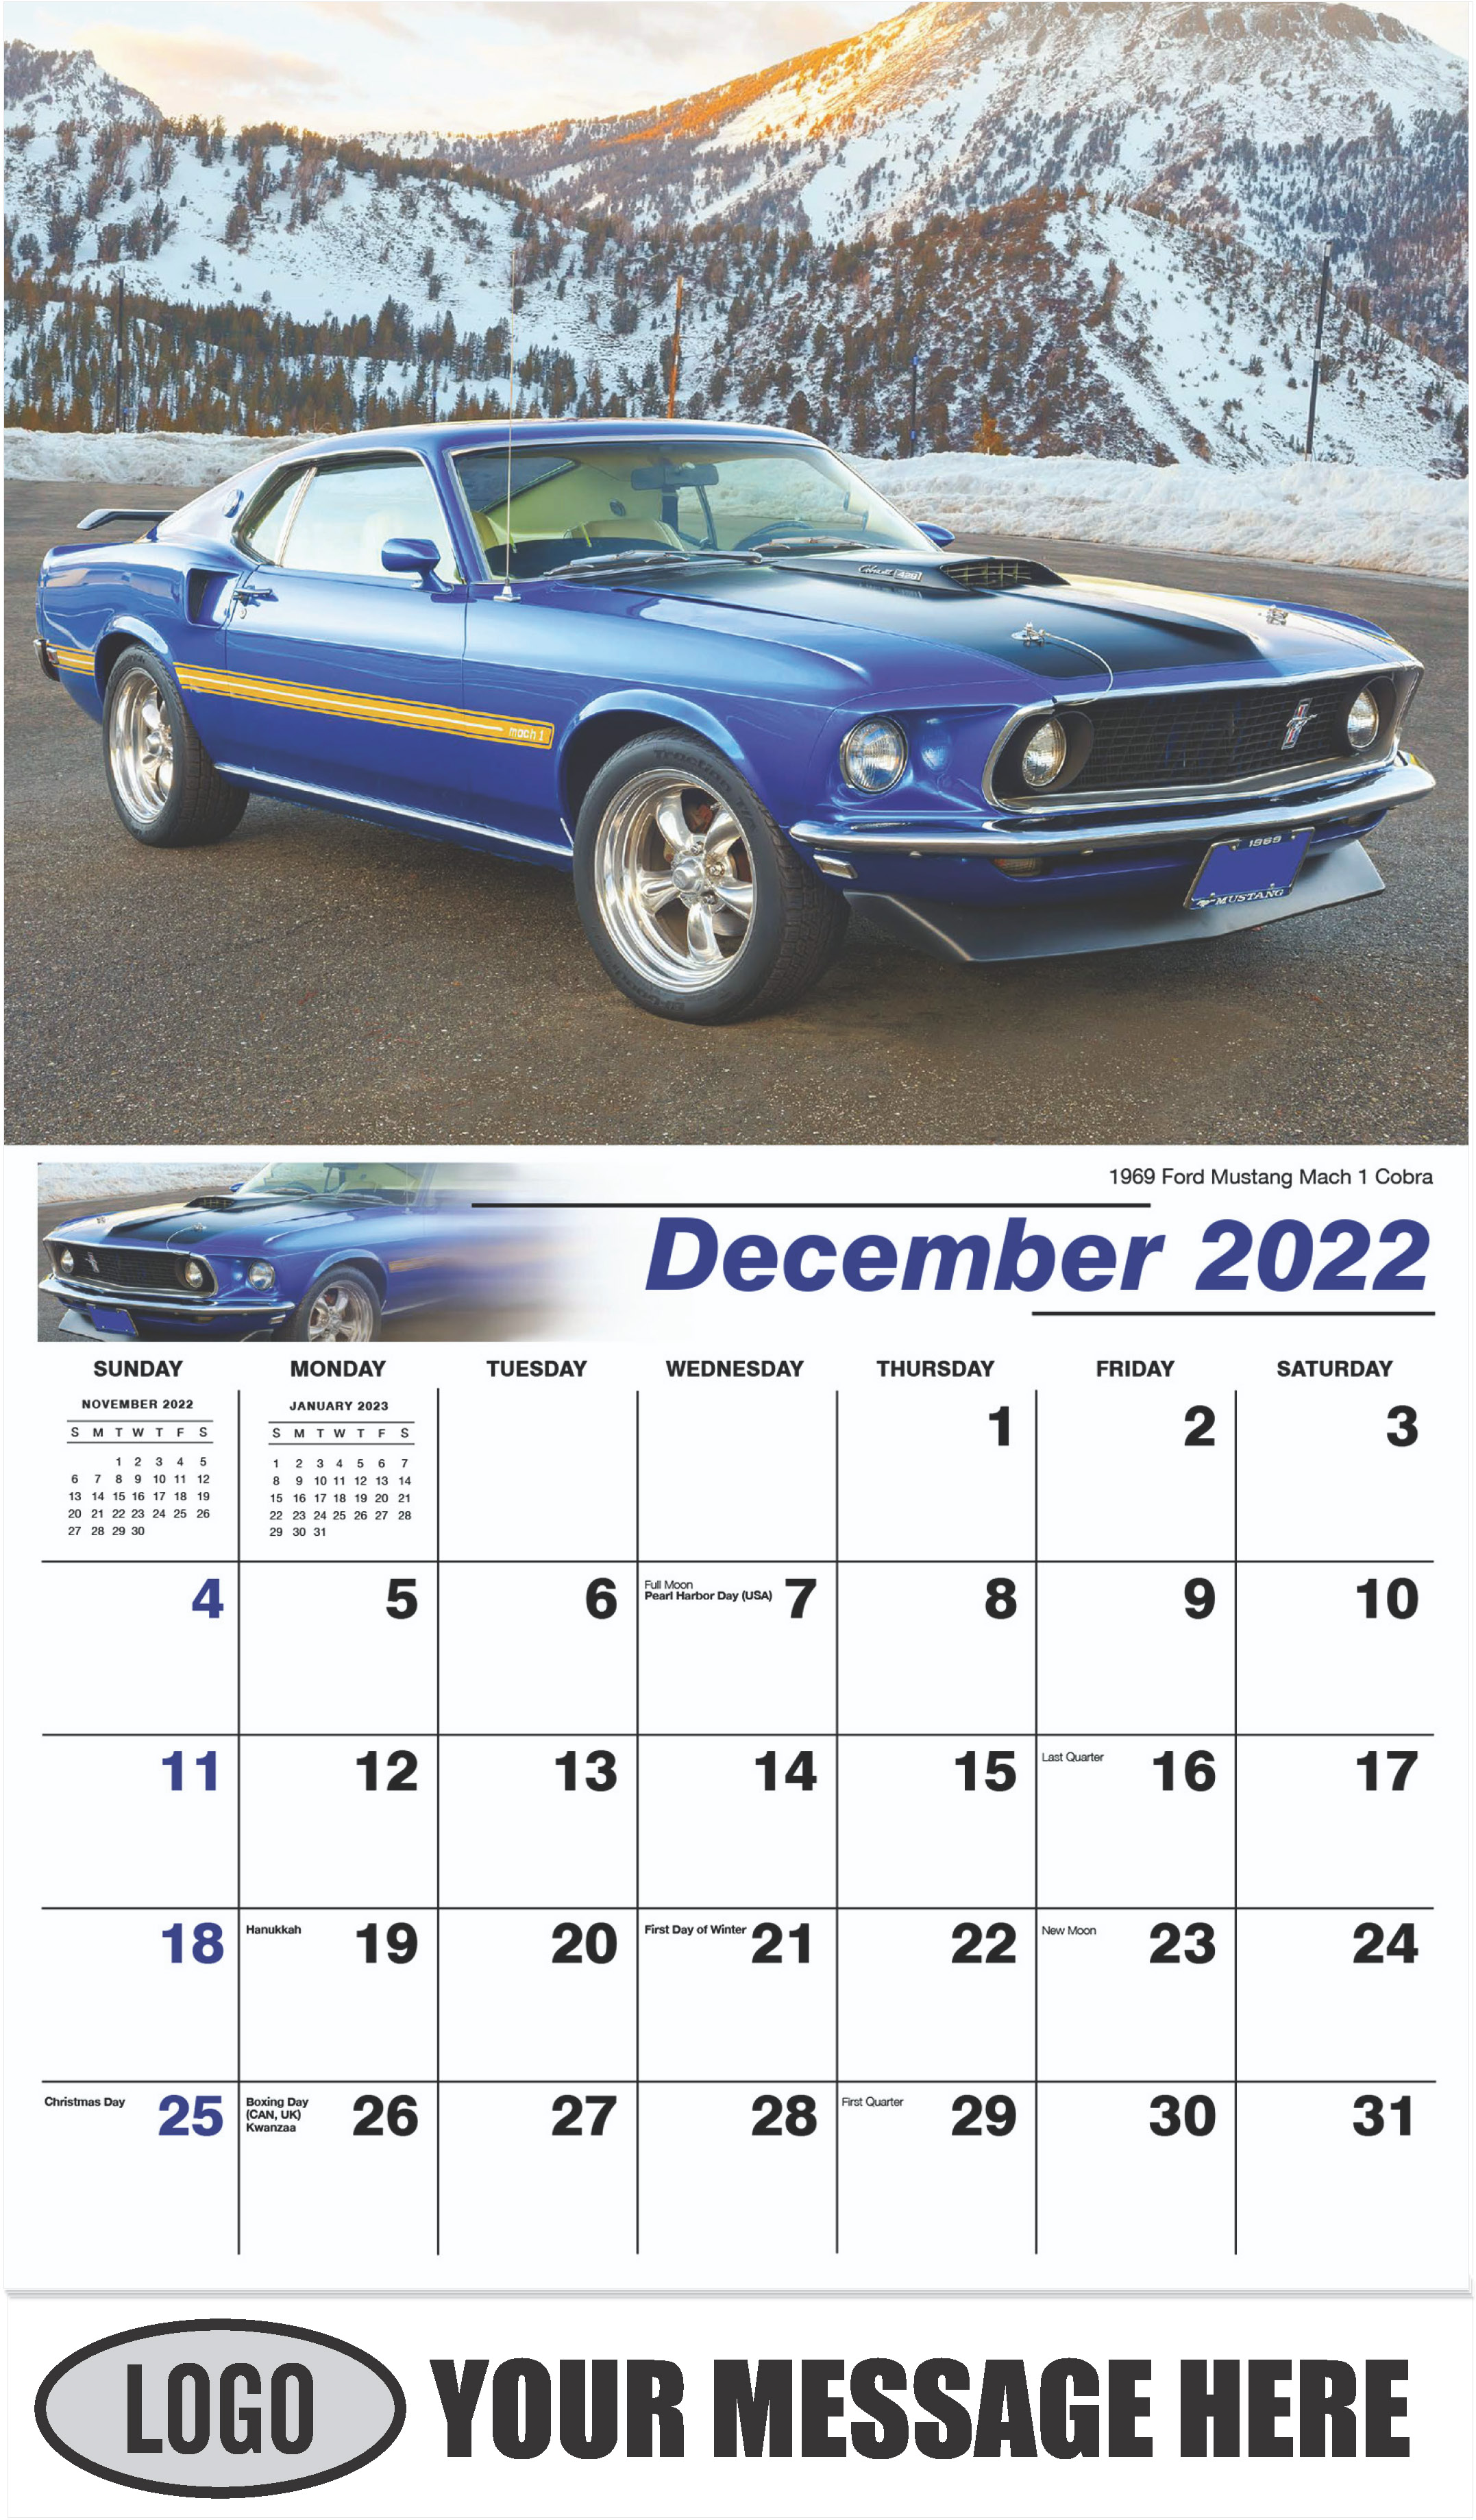 1969 Ford Mustang Mach 1 Cobra - December 2022 - Henry's Heritage Ford Cars 2023 Promotional Calendar